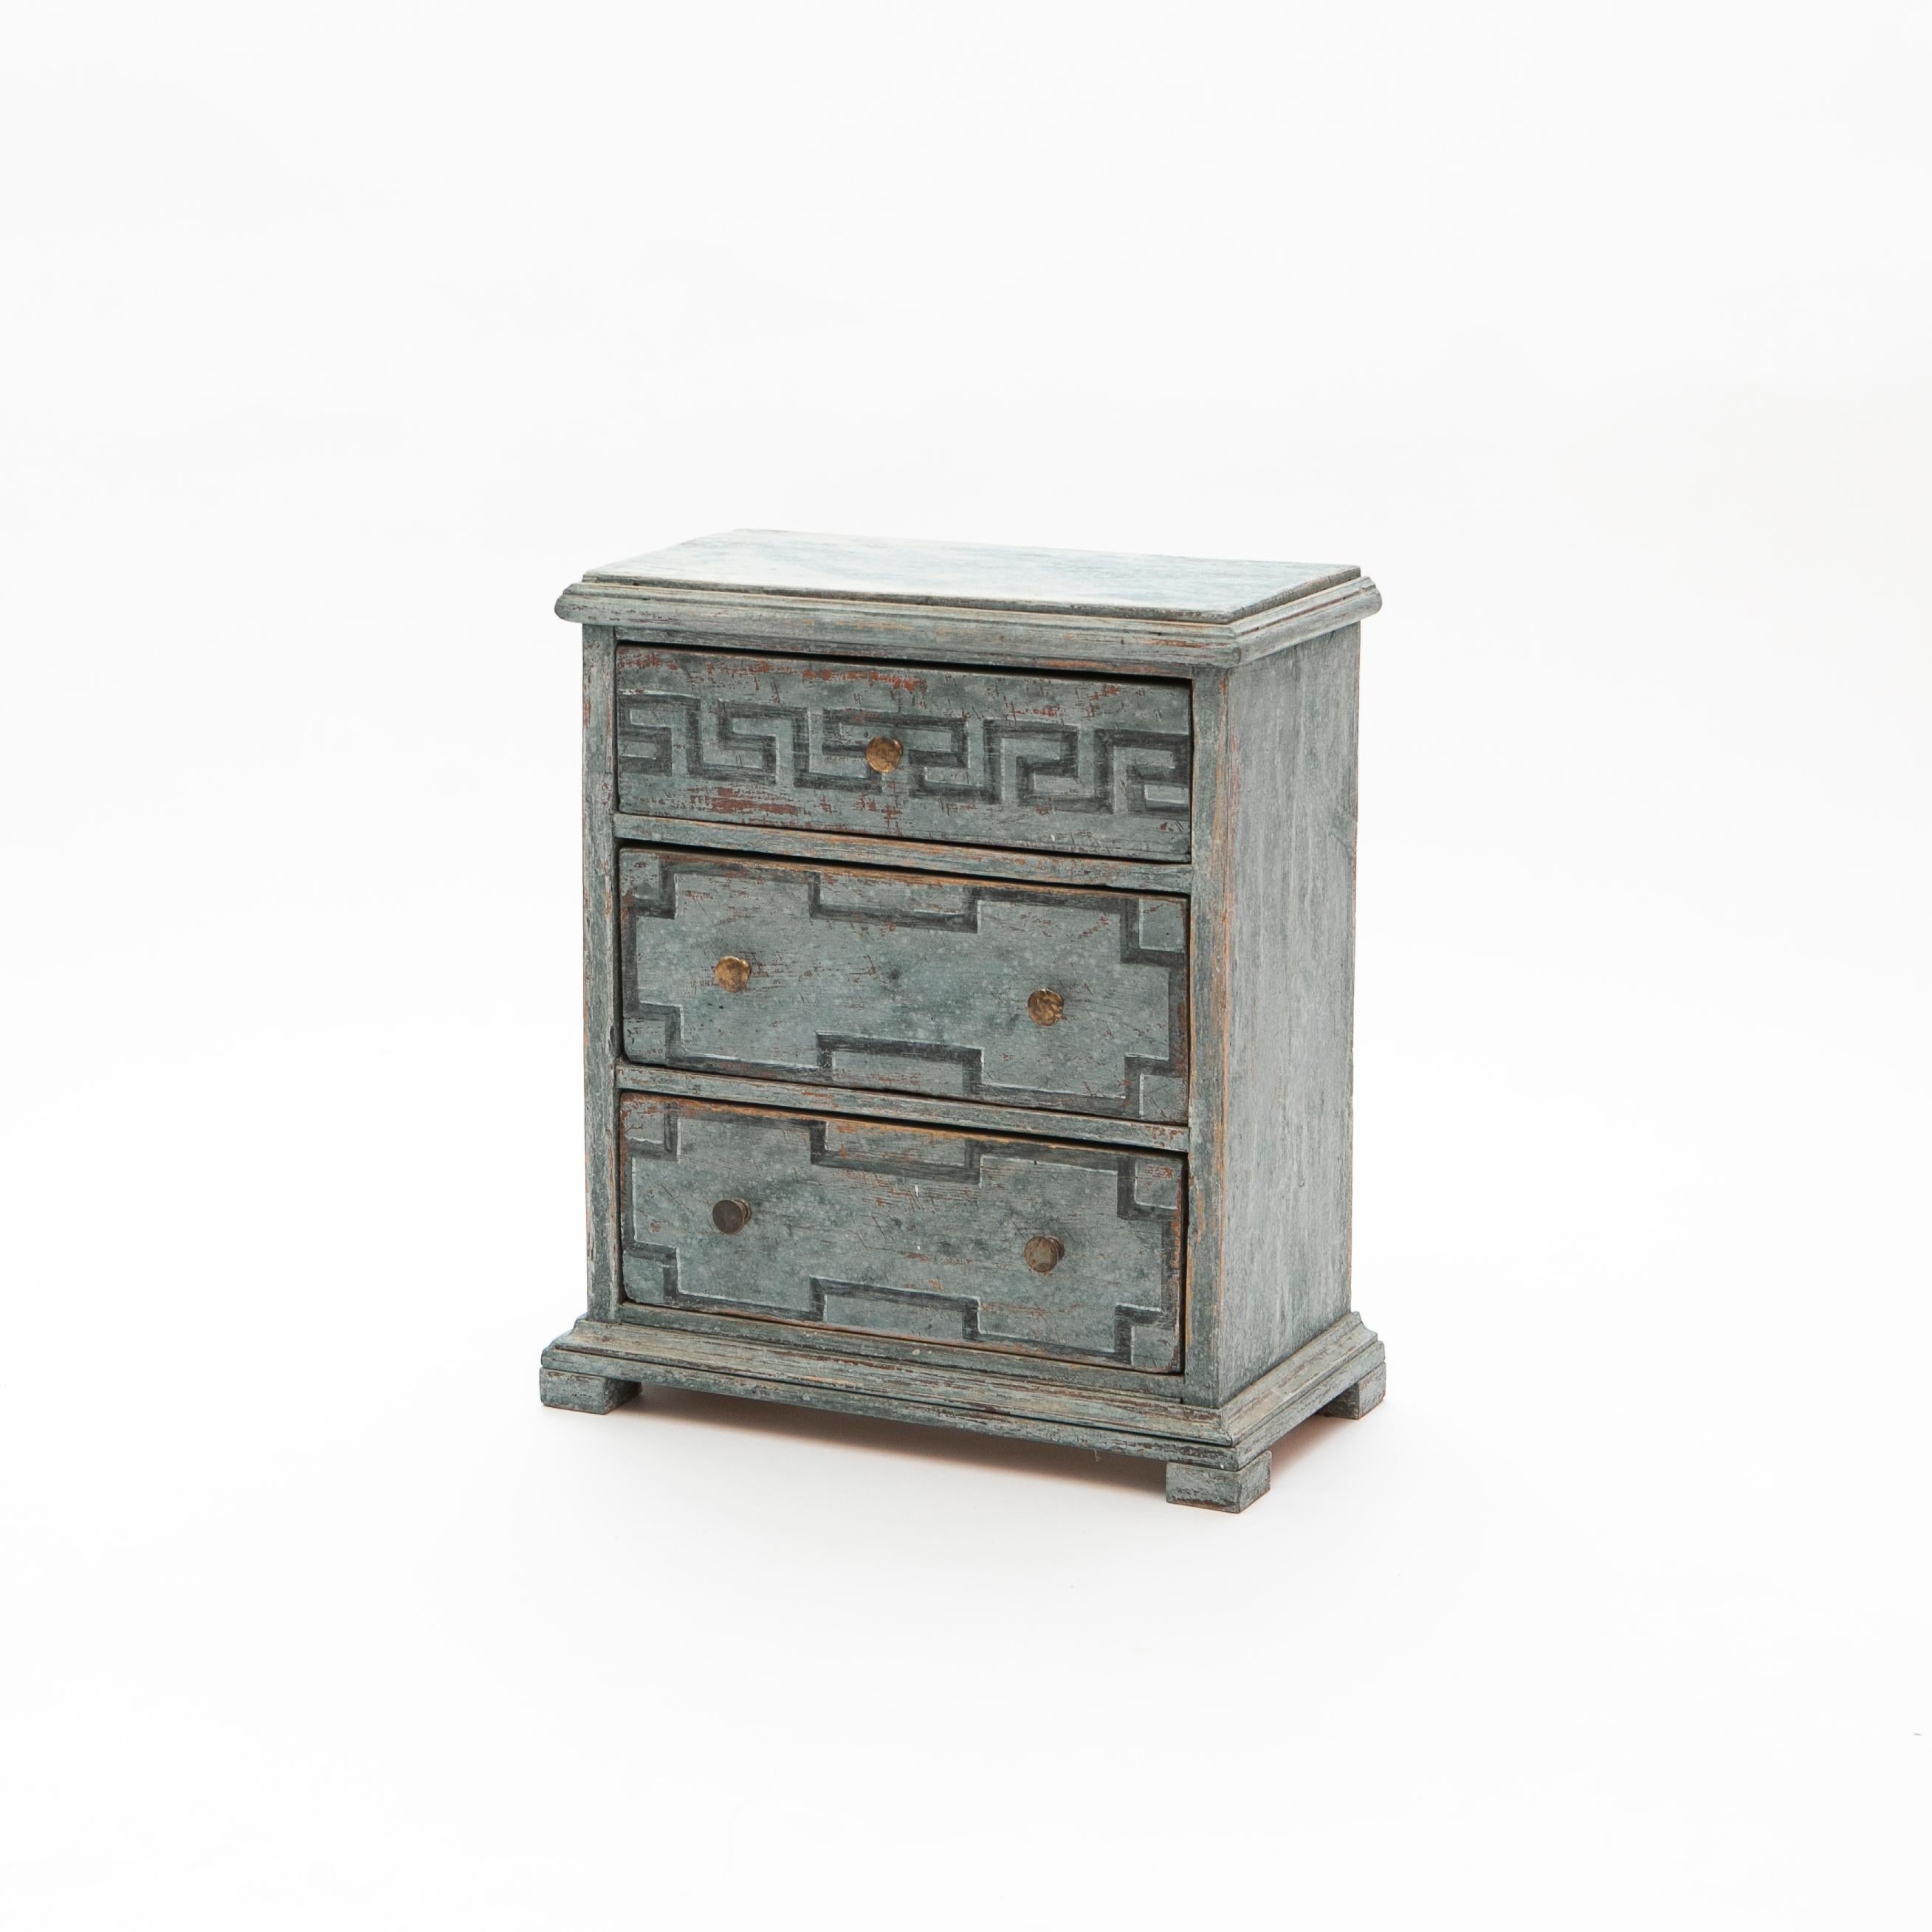 Swedish small-sized chest of drawers or nightstand in blue painted wood. Height: 47 cm / 18,5 inch.
Dating from the early 19th century, this small dresser is composed with three drawers, upper drawer enhanced by painted blue meander décor.

Later